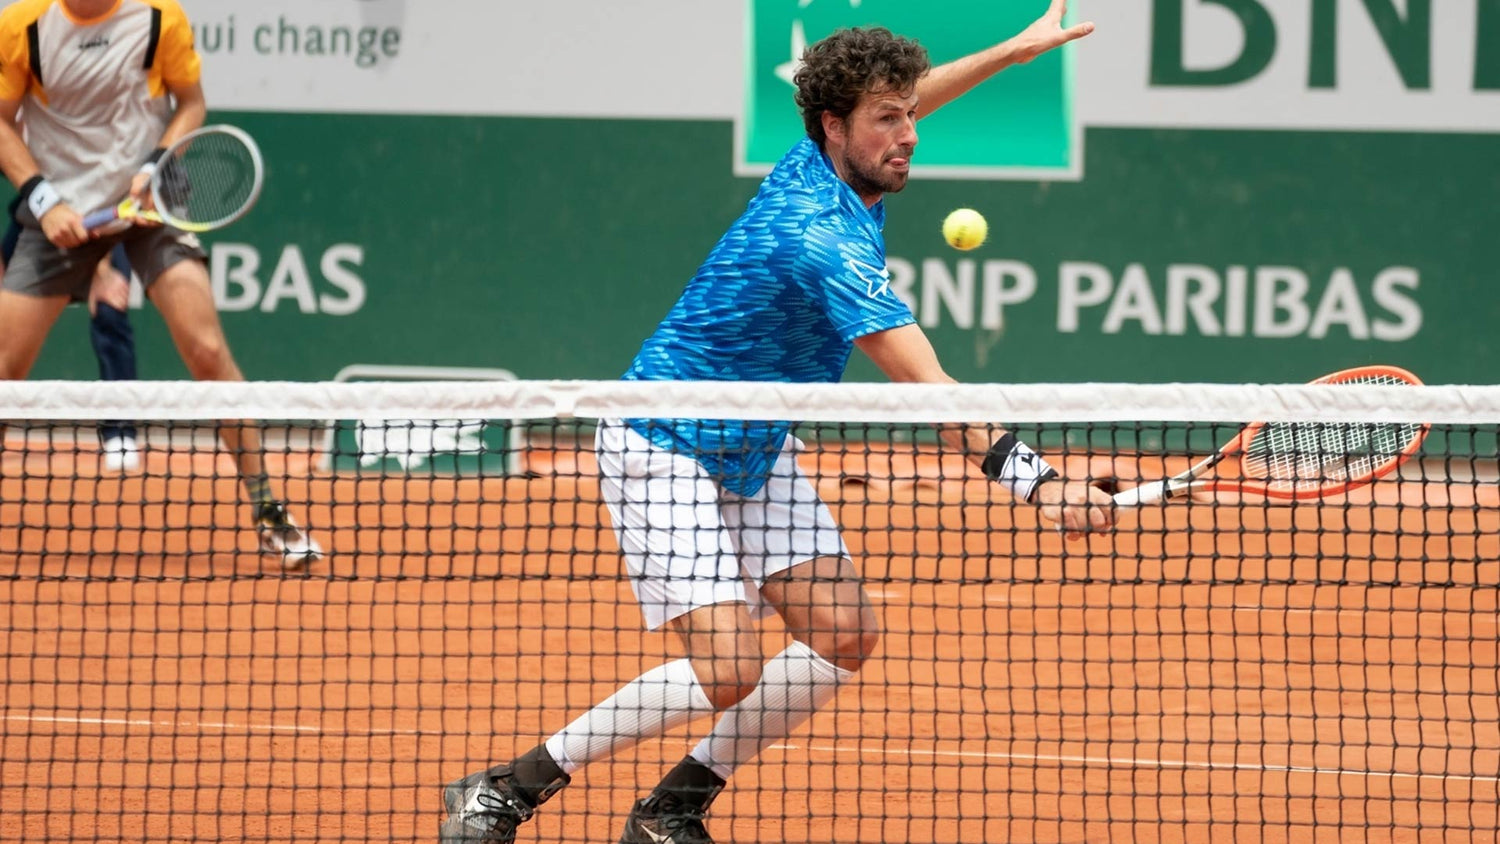 Robin Haase on a tennis court with a blue shirt on.